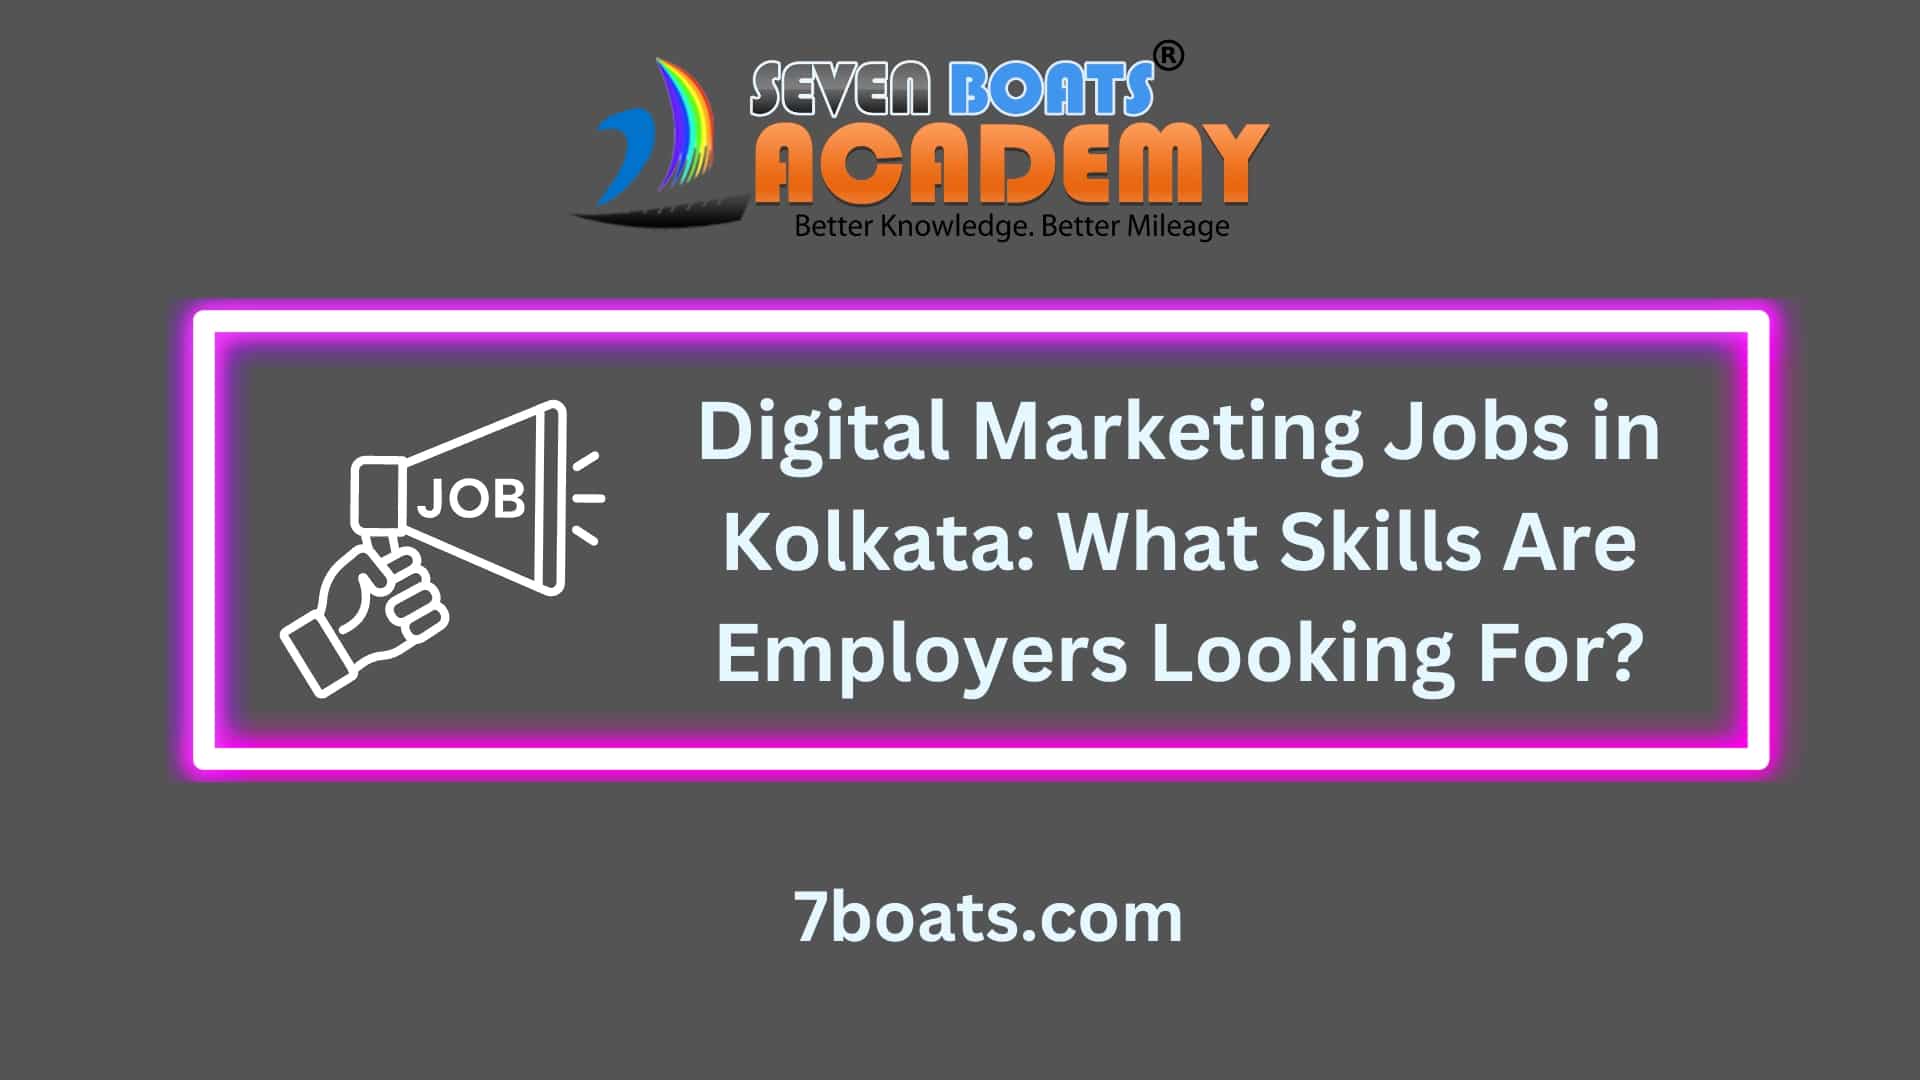 Digital Marketing Jobs in Kolkata - What Skills Are Employers Looking For